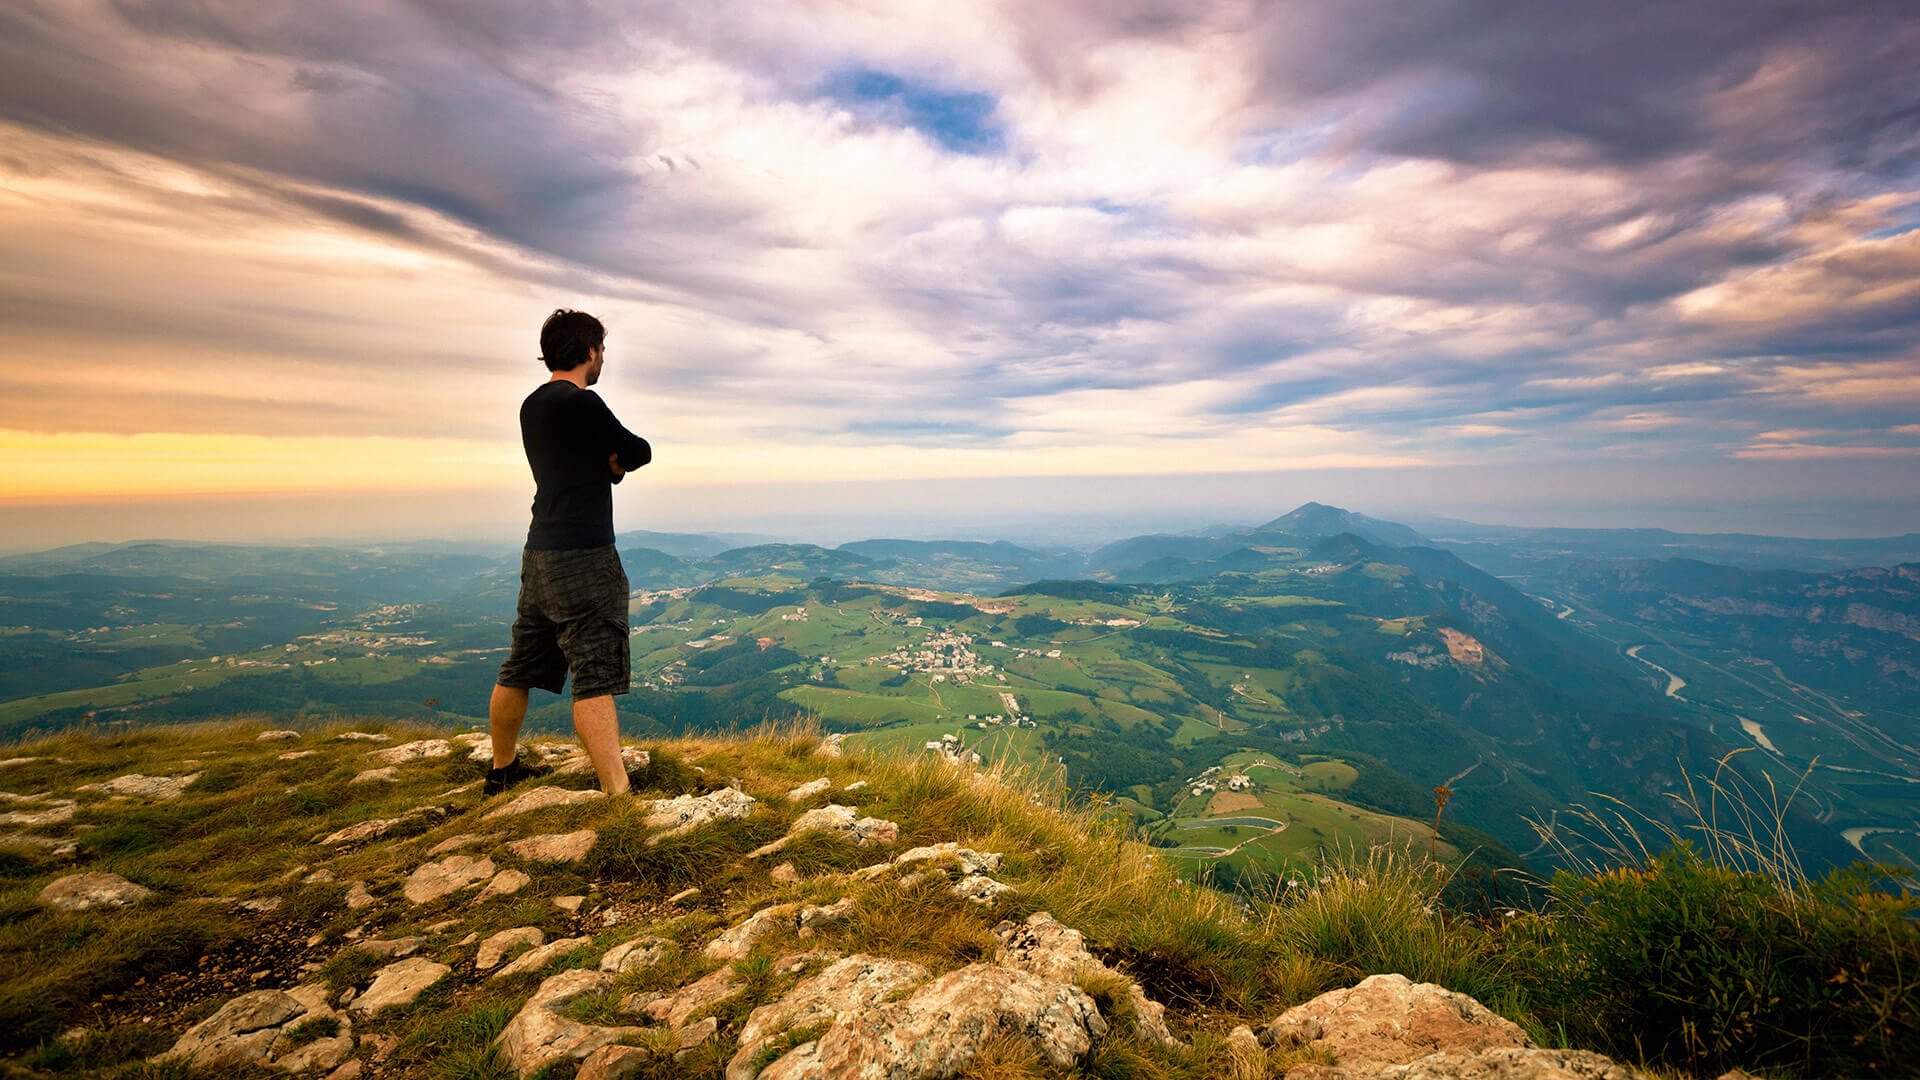 A solitary man stands atop a hill, gazing at a verdant valley under a dramatic sky at dusk, embodying a moment of reflection and vastness.